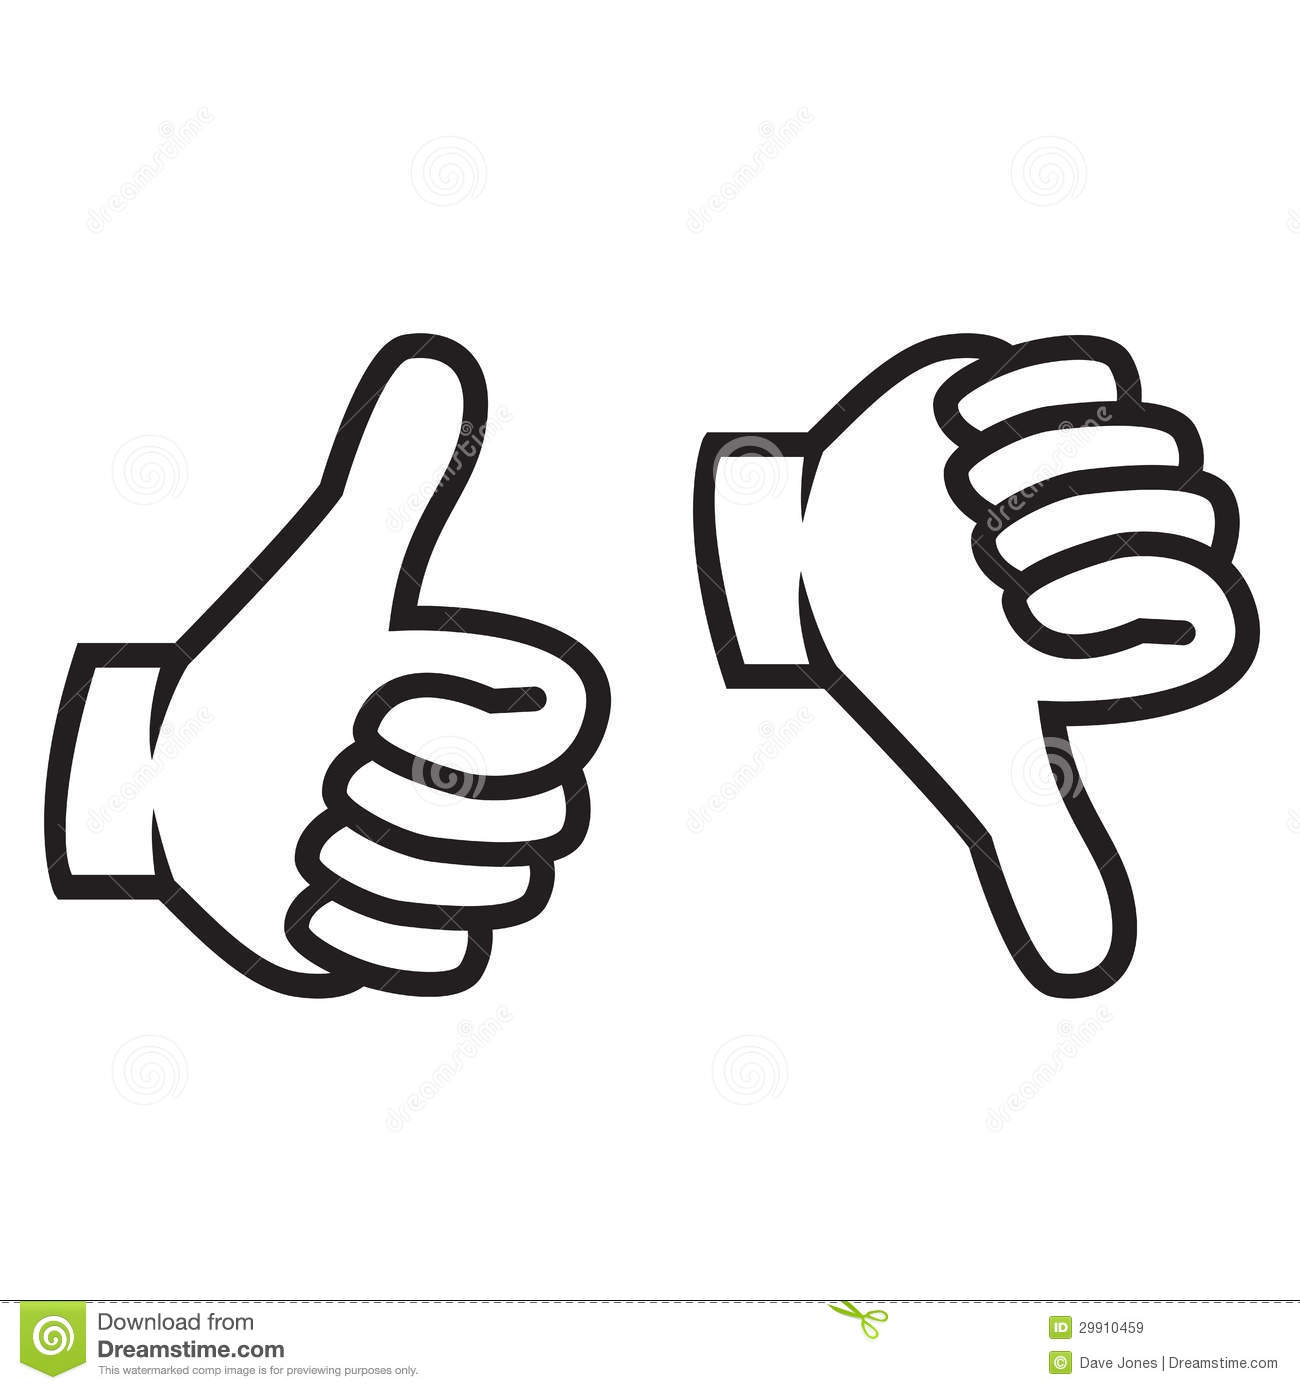 Thumbs Up Clipart Thumbs Up Down Gesture Clip Art Silhouette Black